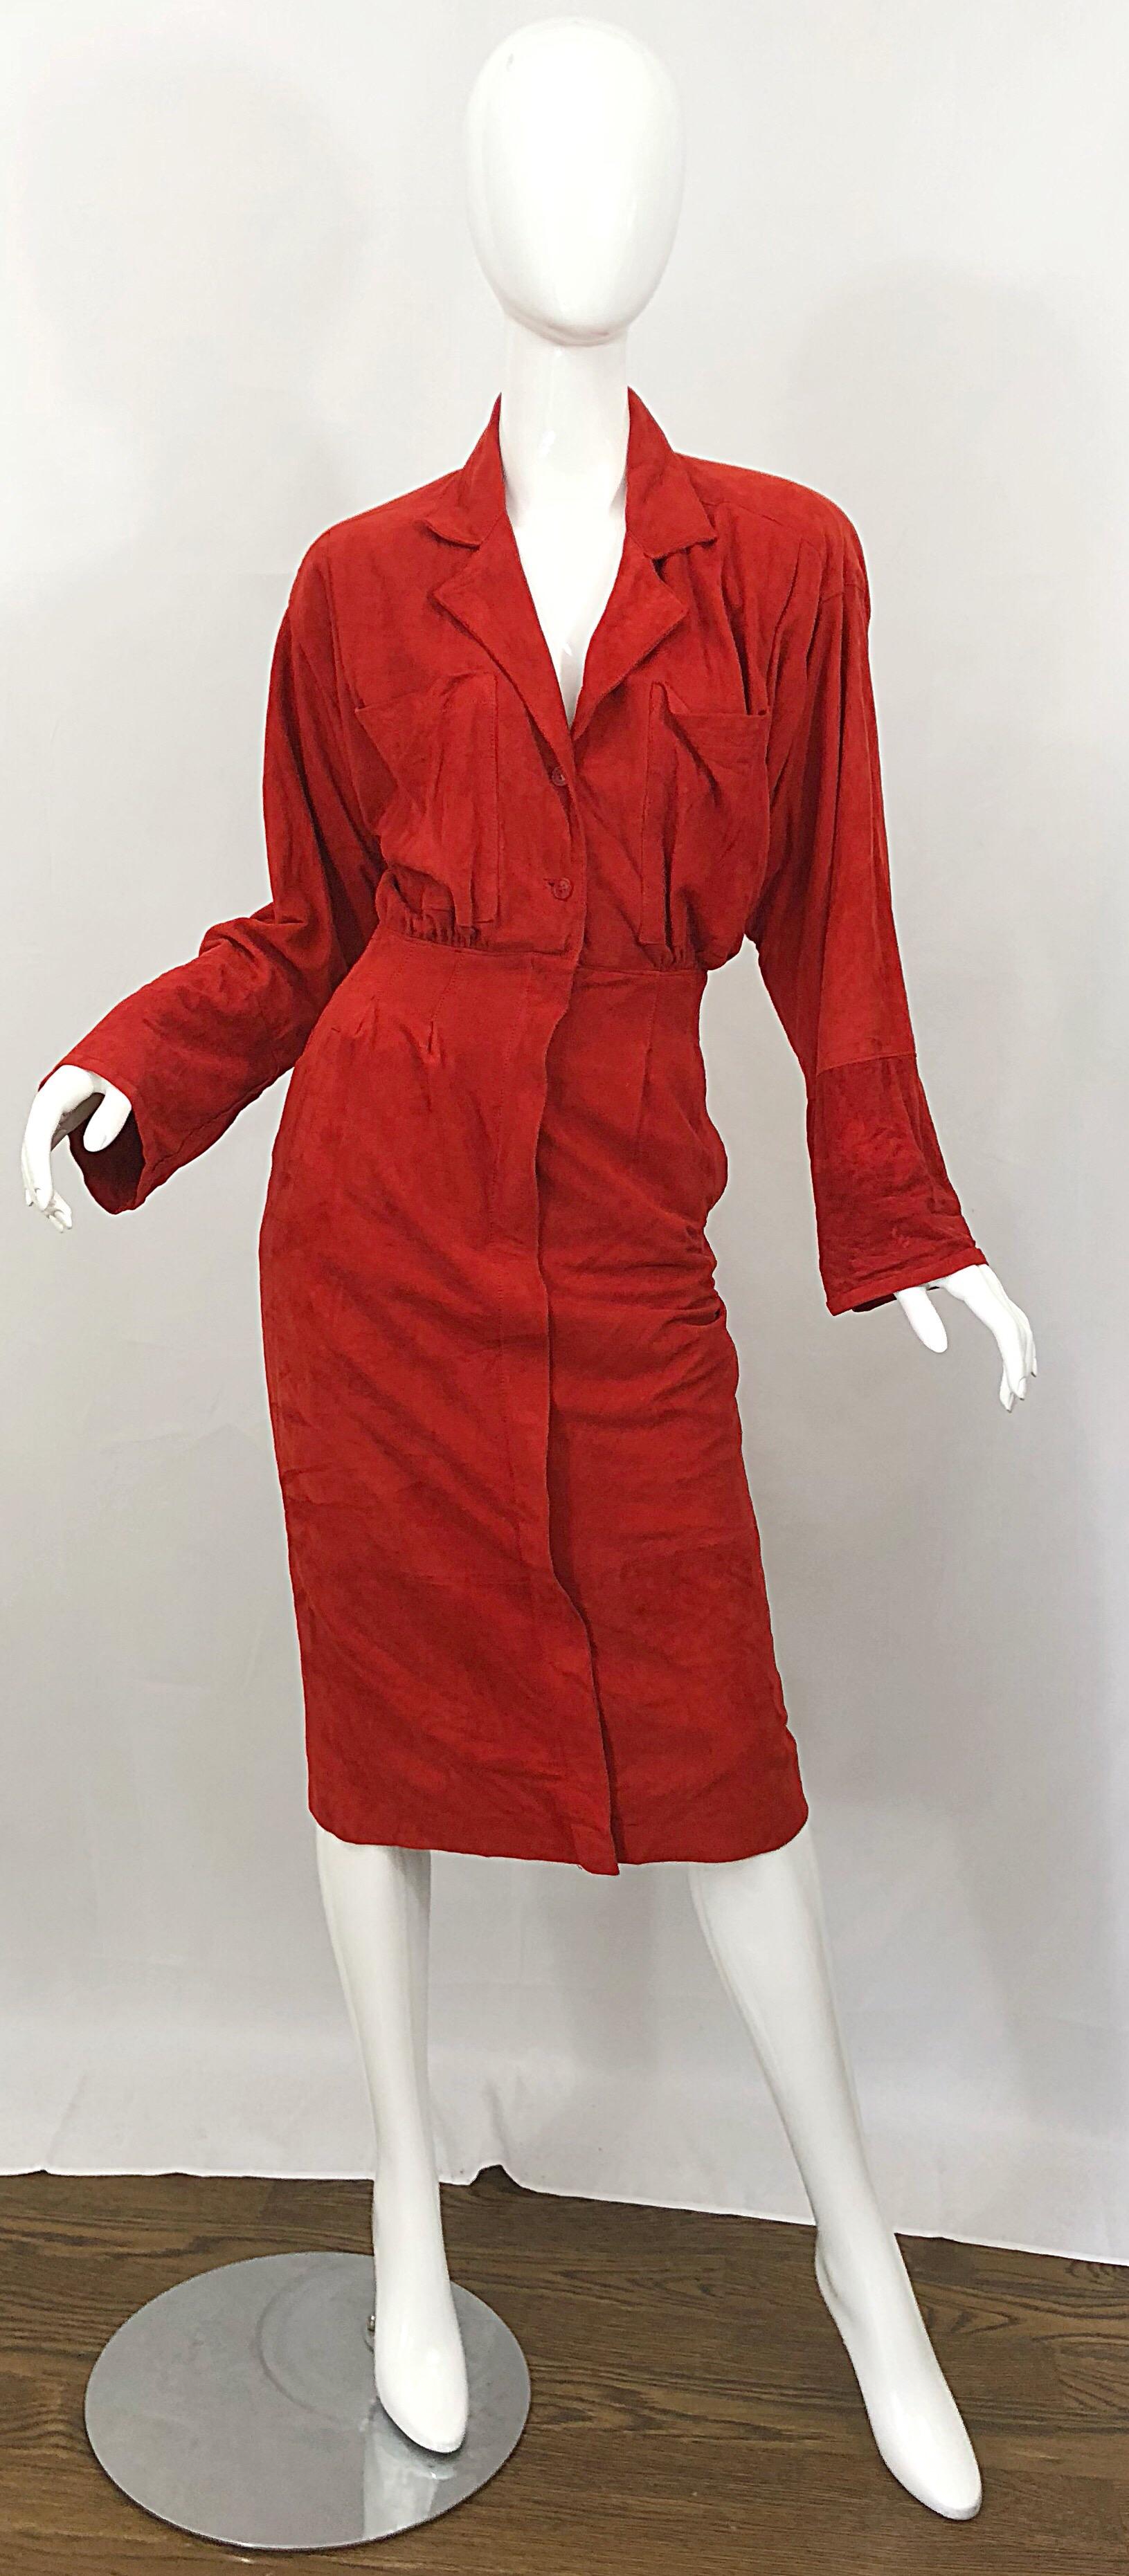 Chic rust red suede leather shirt jacket dress! Features a beautiful warm tone of red that really looks great on pretty much any skin tone. Loose fitting bodice with pockets at each breast. Sleeves feature a slight flare. Hidden buttons up the